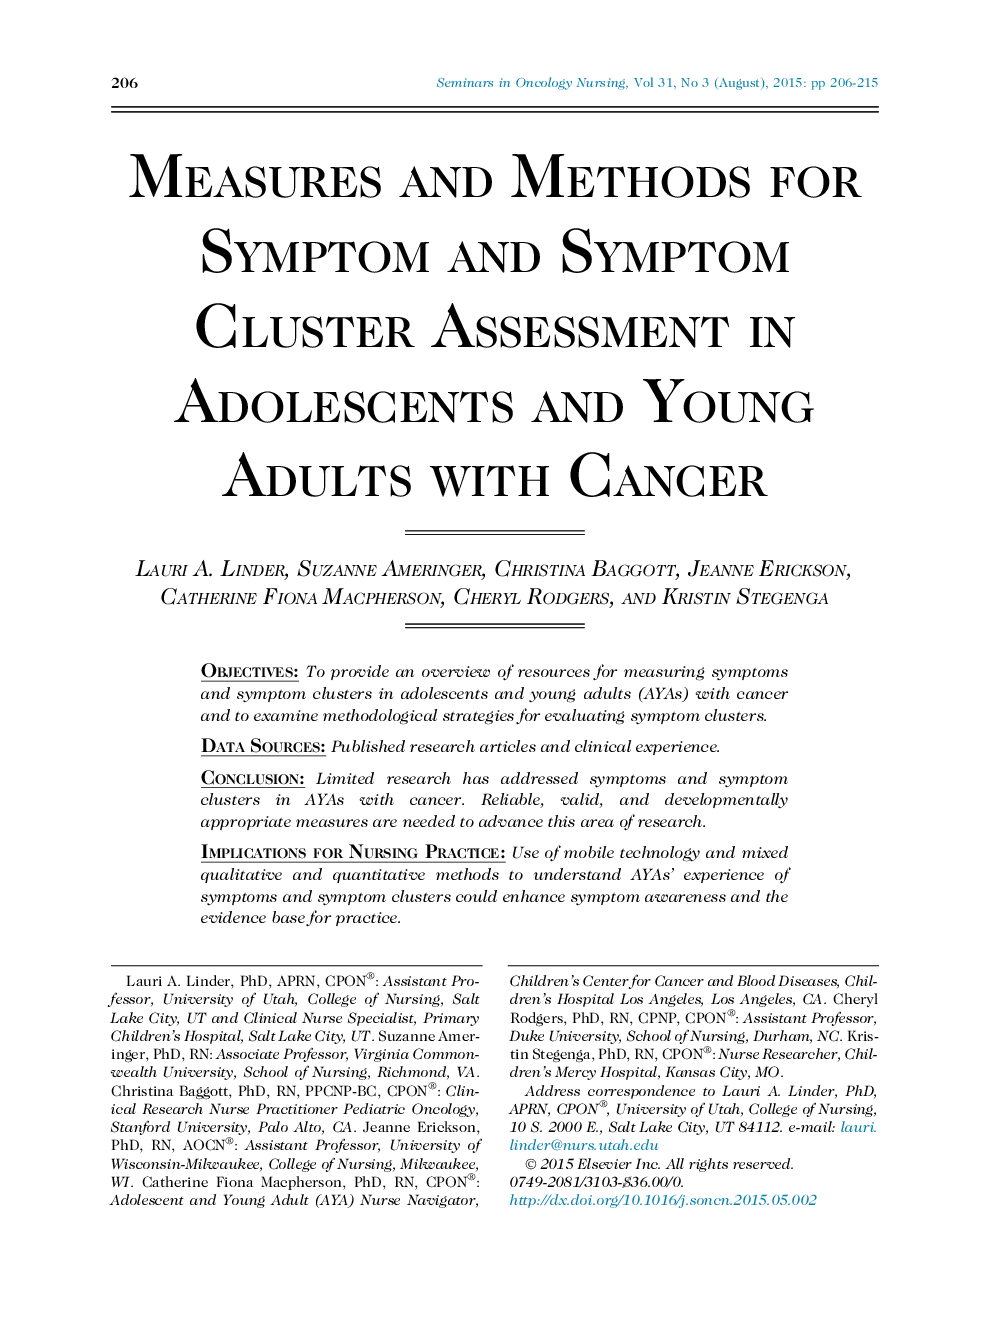 Measures and Methods for Symptom and Symptom Cluster Assessment in Adolescents and Young Adults with Cancer